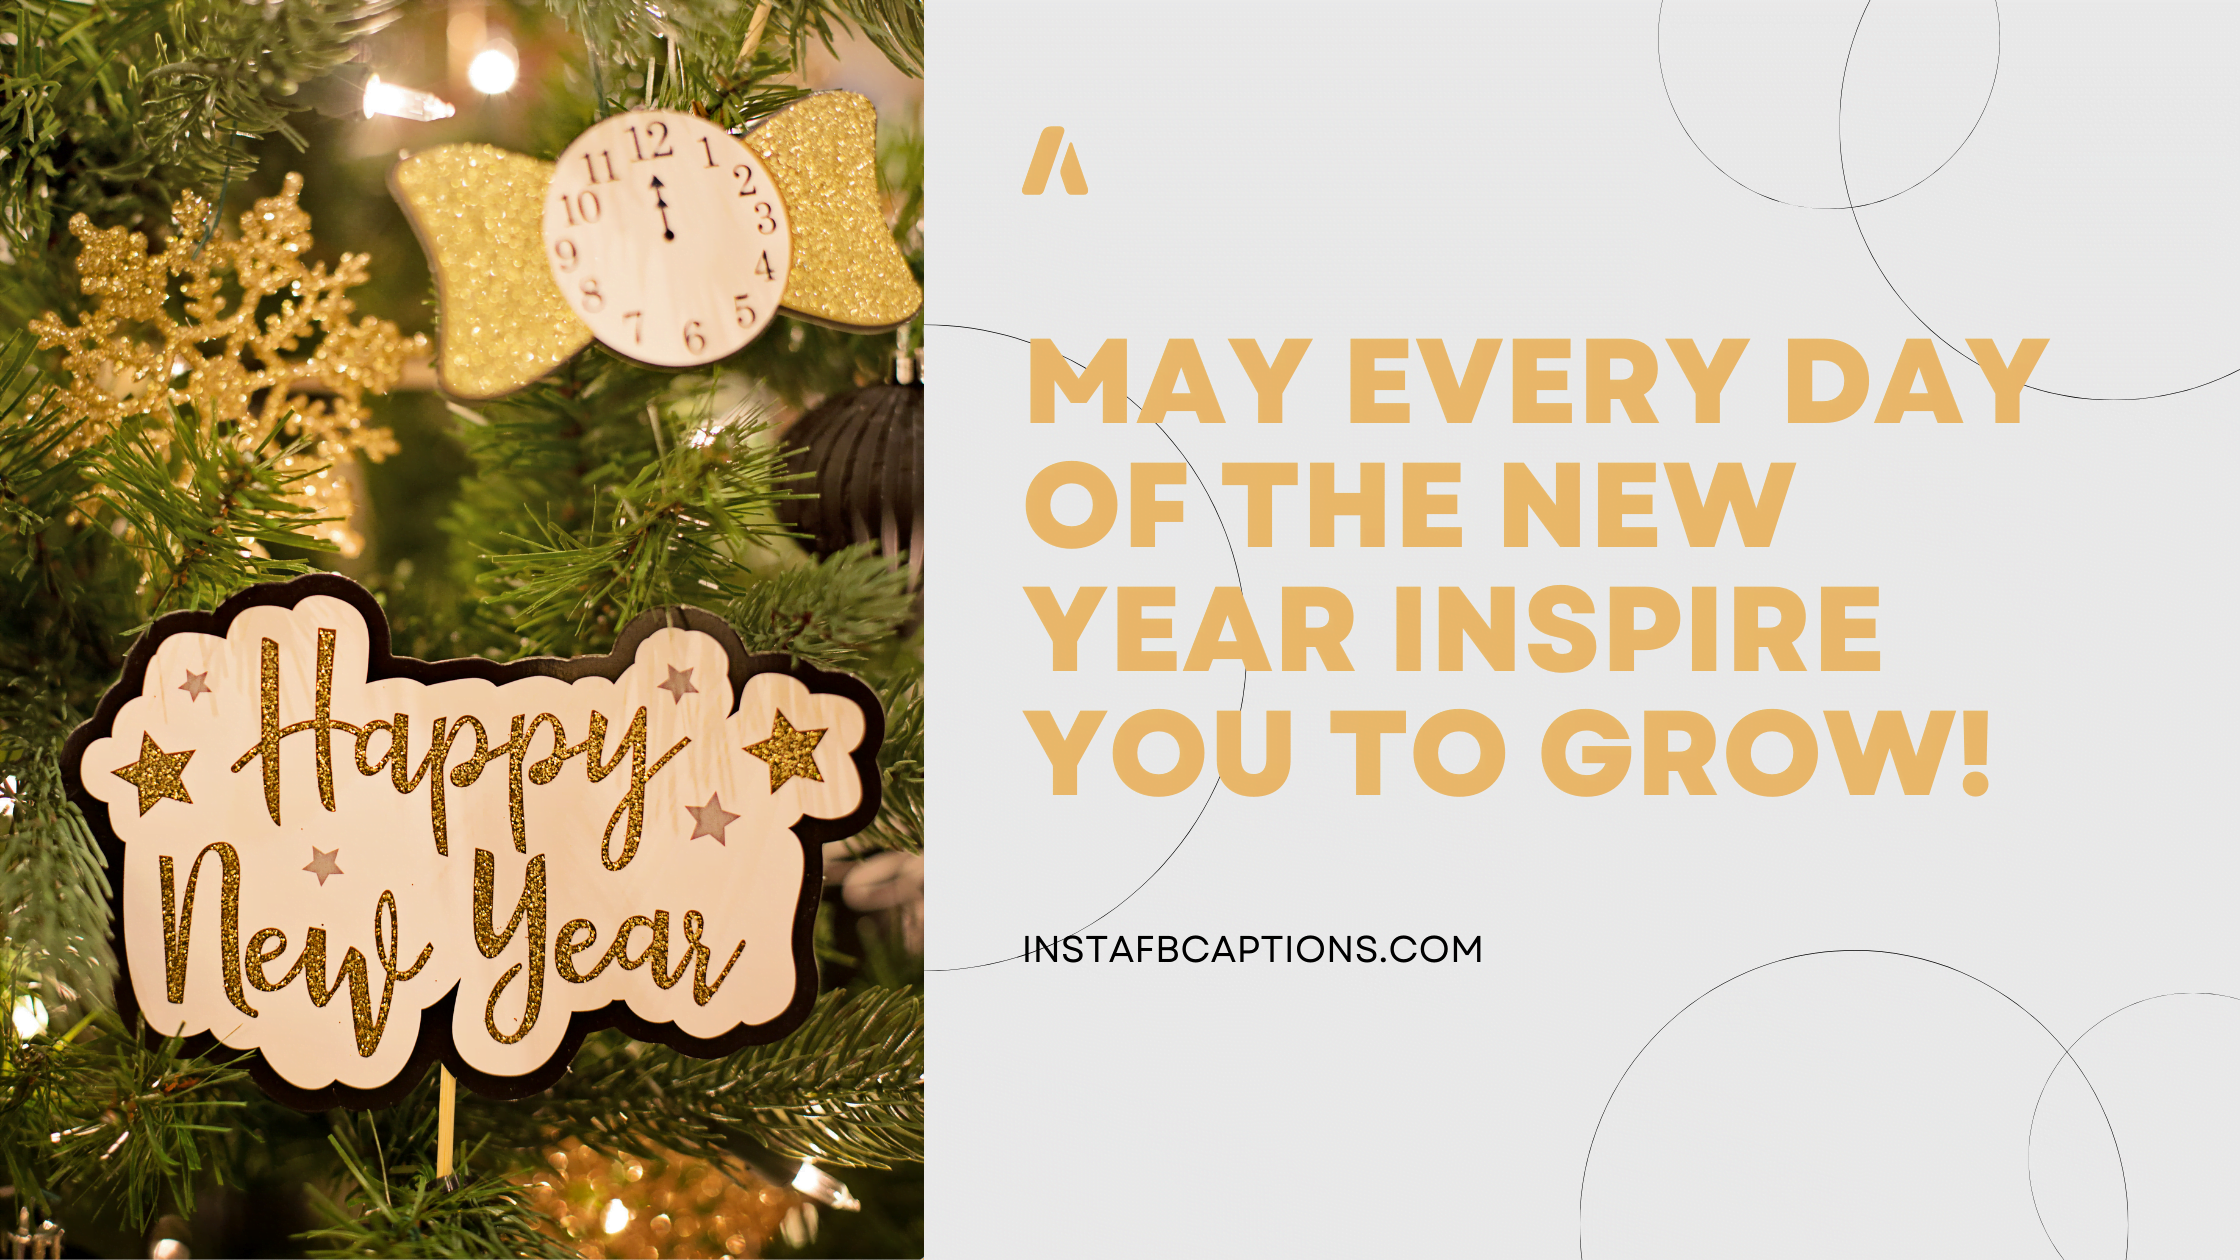 New Year Wishes And Captions  - New Year Wishes and Captions - 1000+ NEW YEAR Instagram Captions, Quotes &amp; Wishes 2022